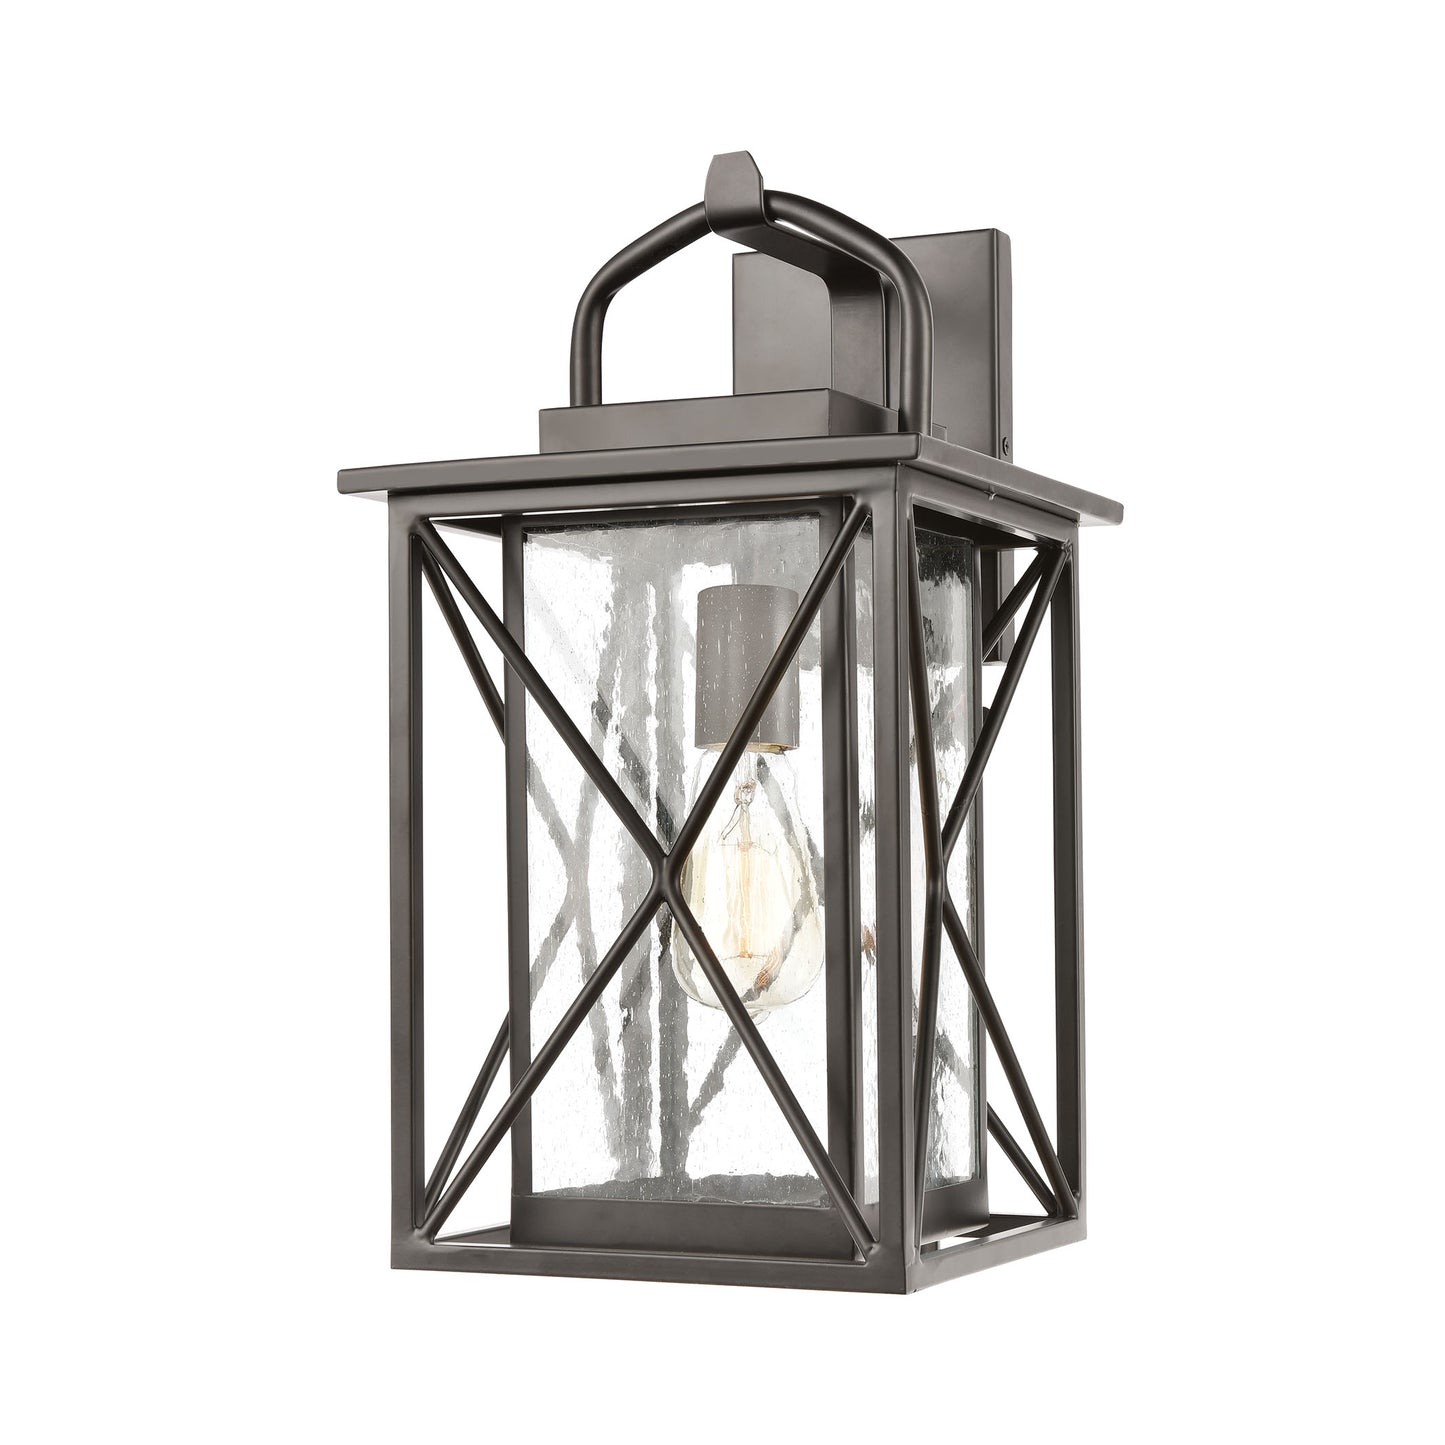 ELK Lighting 46751/1 - Carriage 9" Wide Light 1-Light Sconce in Matte Black with Seedy Glass